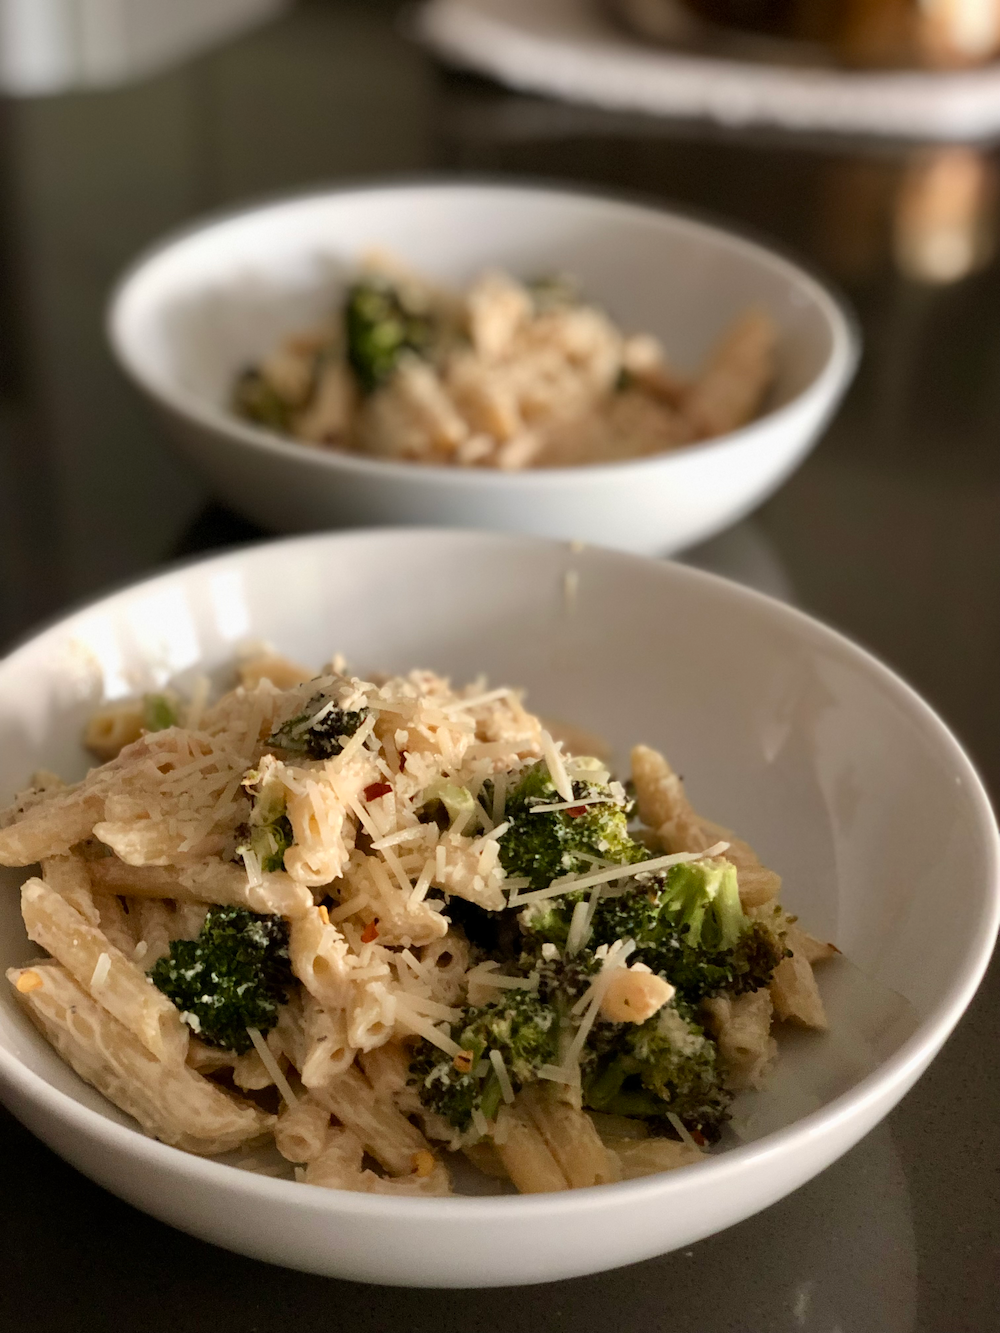 Broccoli and Goat Cheese Pasta